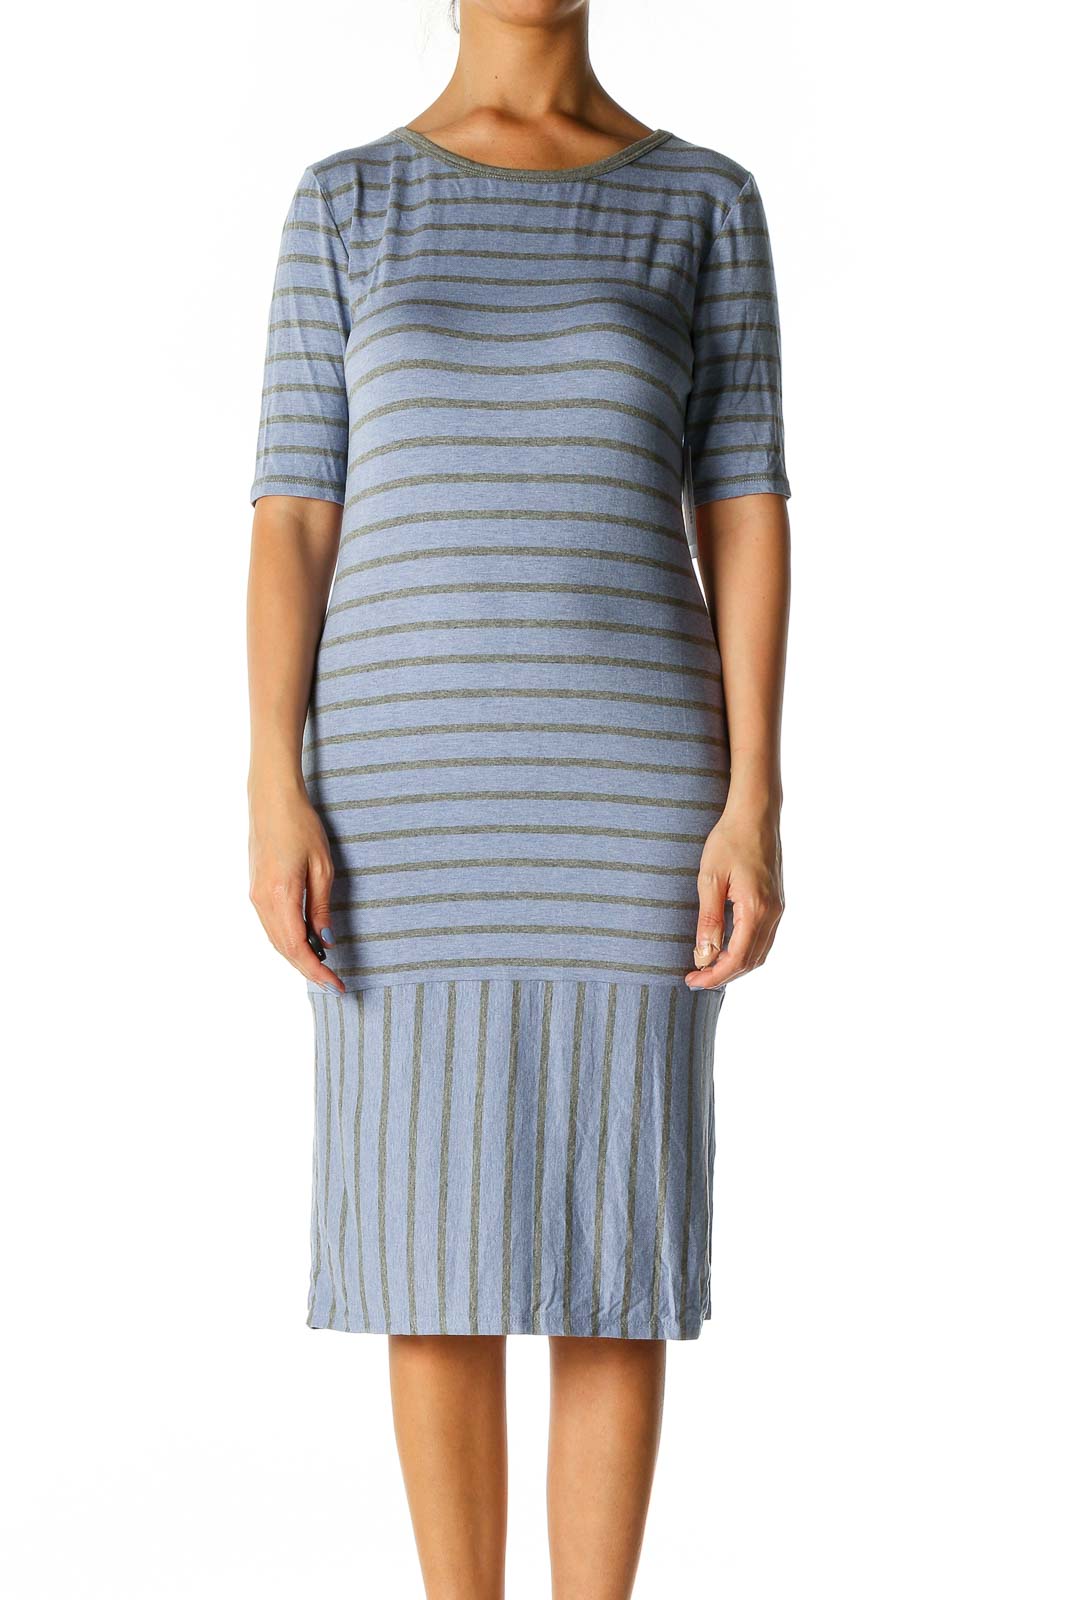 Blue Striped Chic A-Line Dress Front